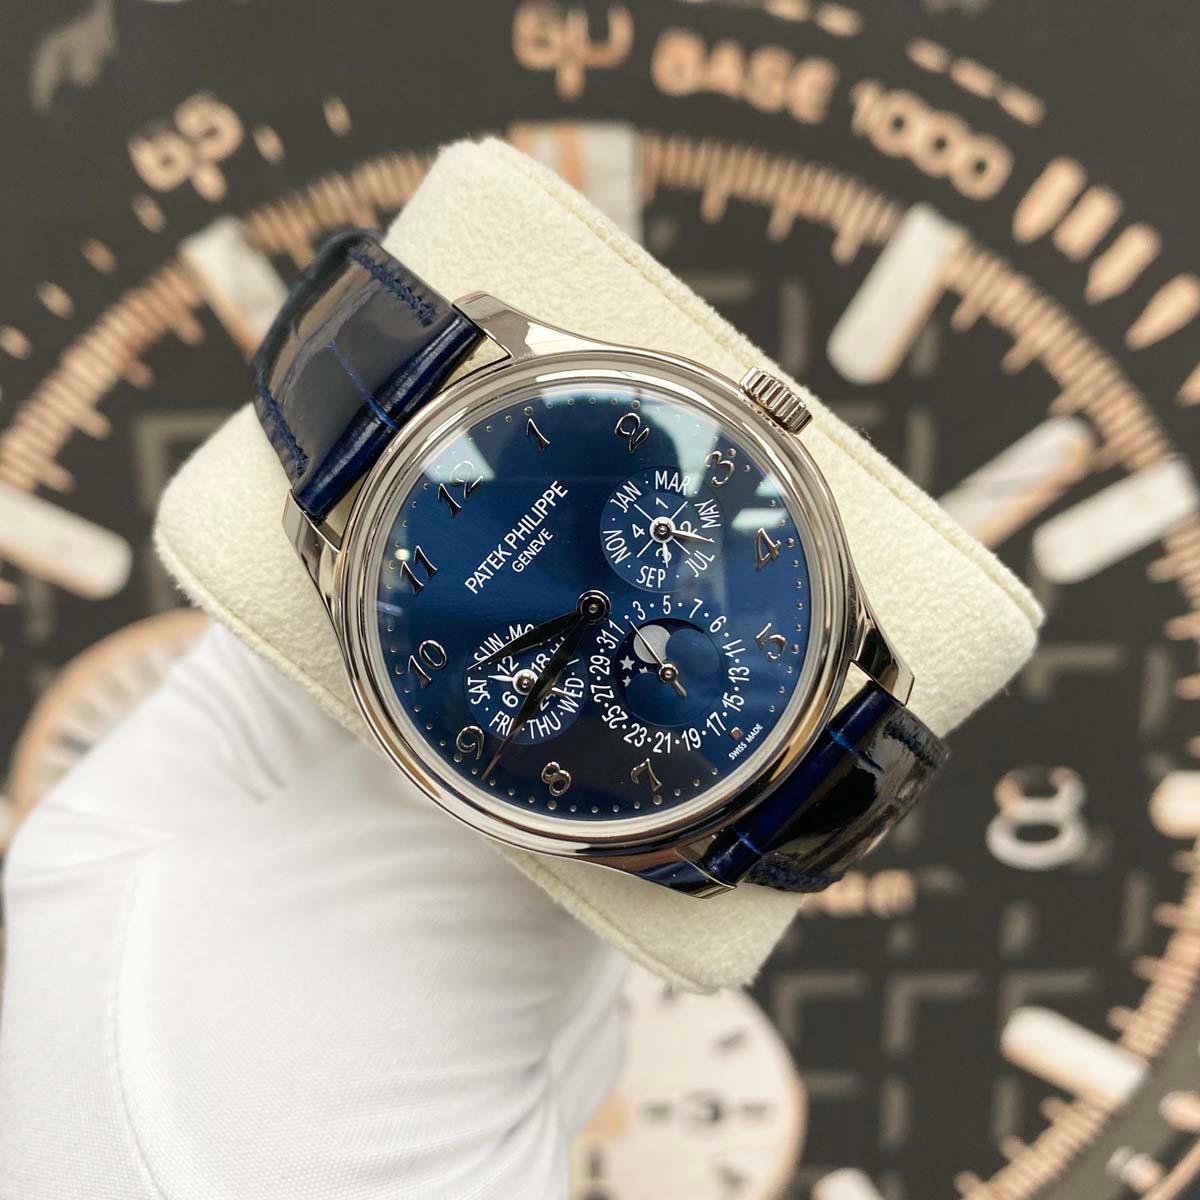 Patek Philippe Extra-Thin Grand Complications Perpetual Calendar Moon Phase 39mm 5327G Blue Dial Pre-Owned - Gotham Trading 